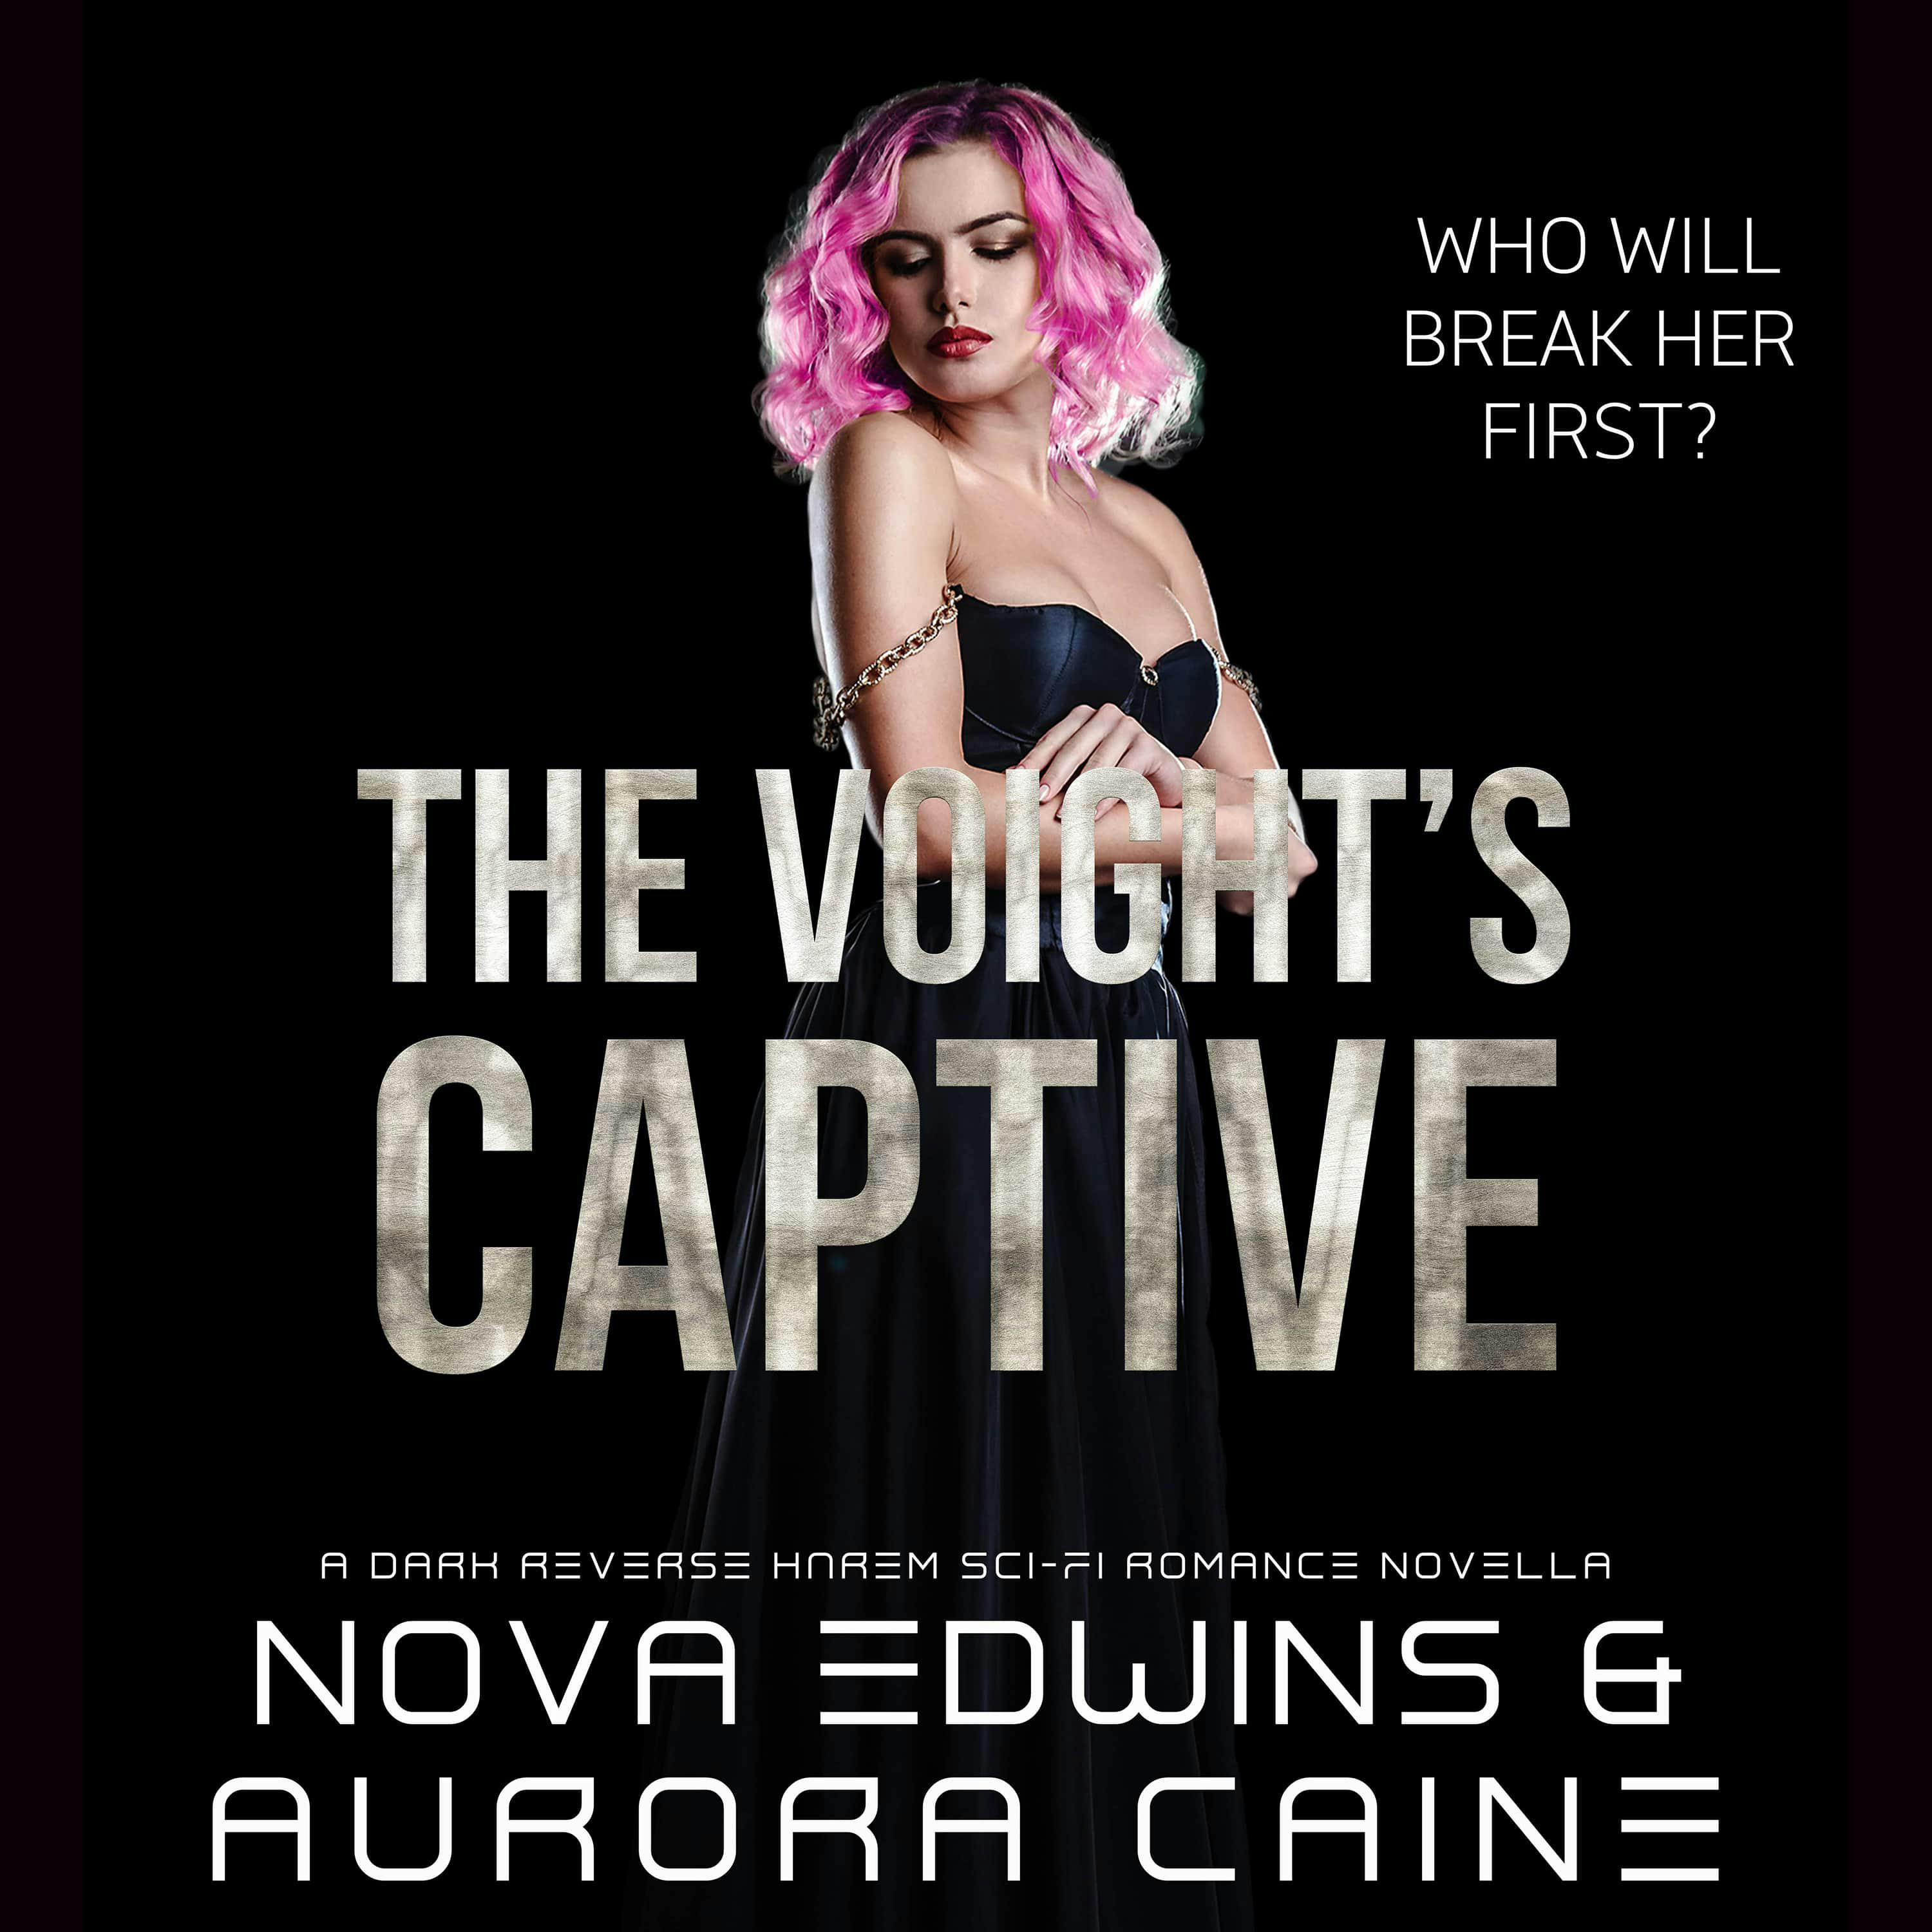 The Voight's Captive - undefined